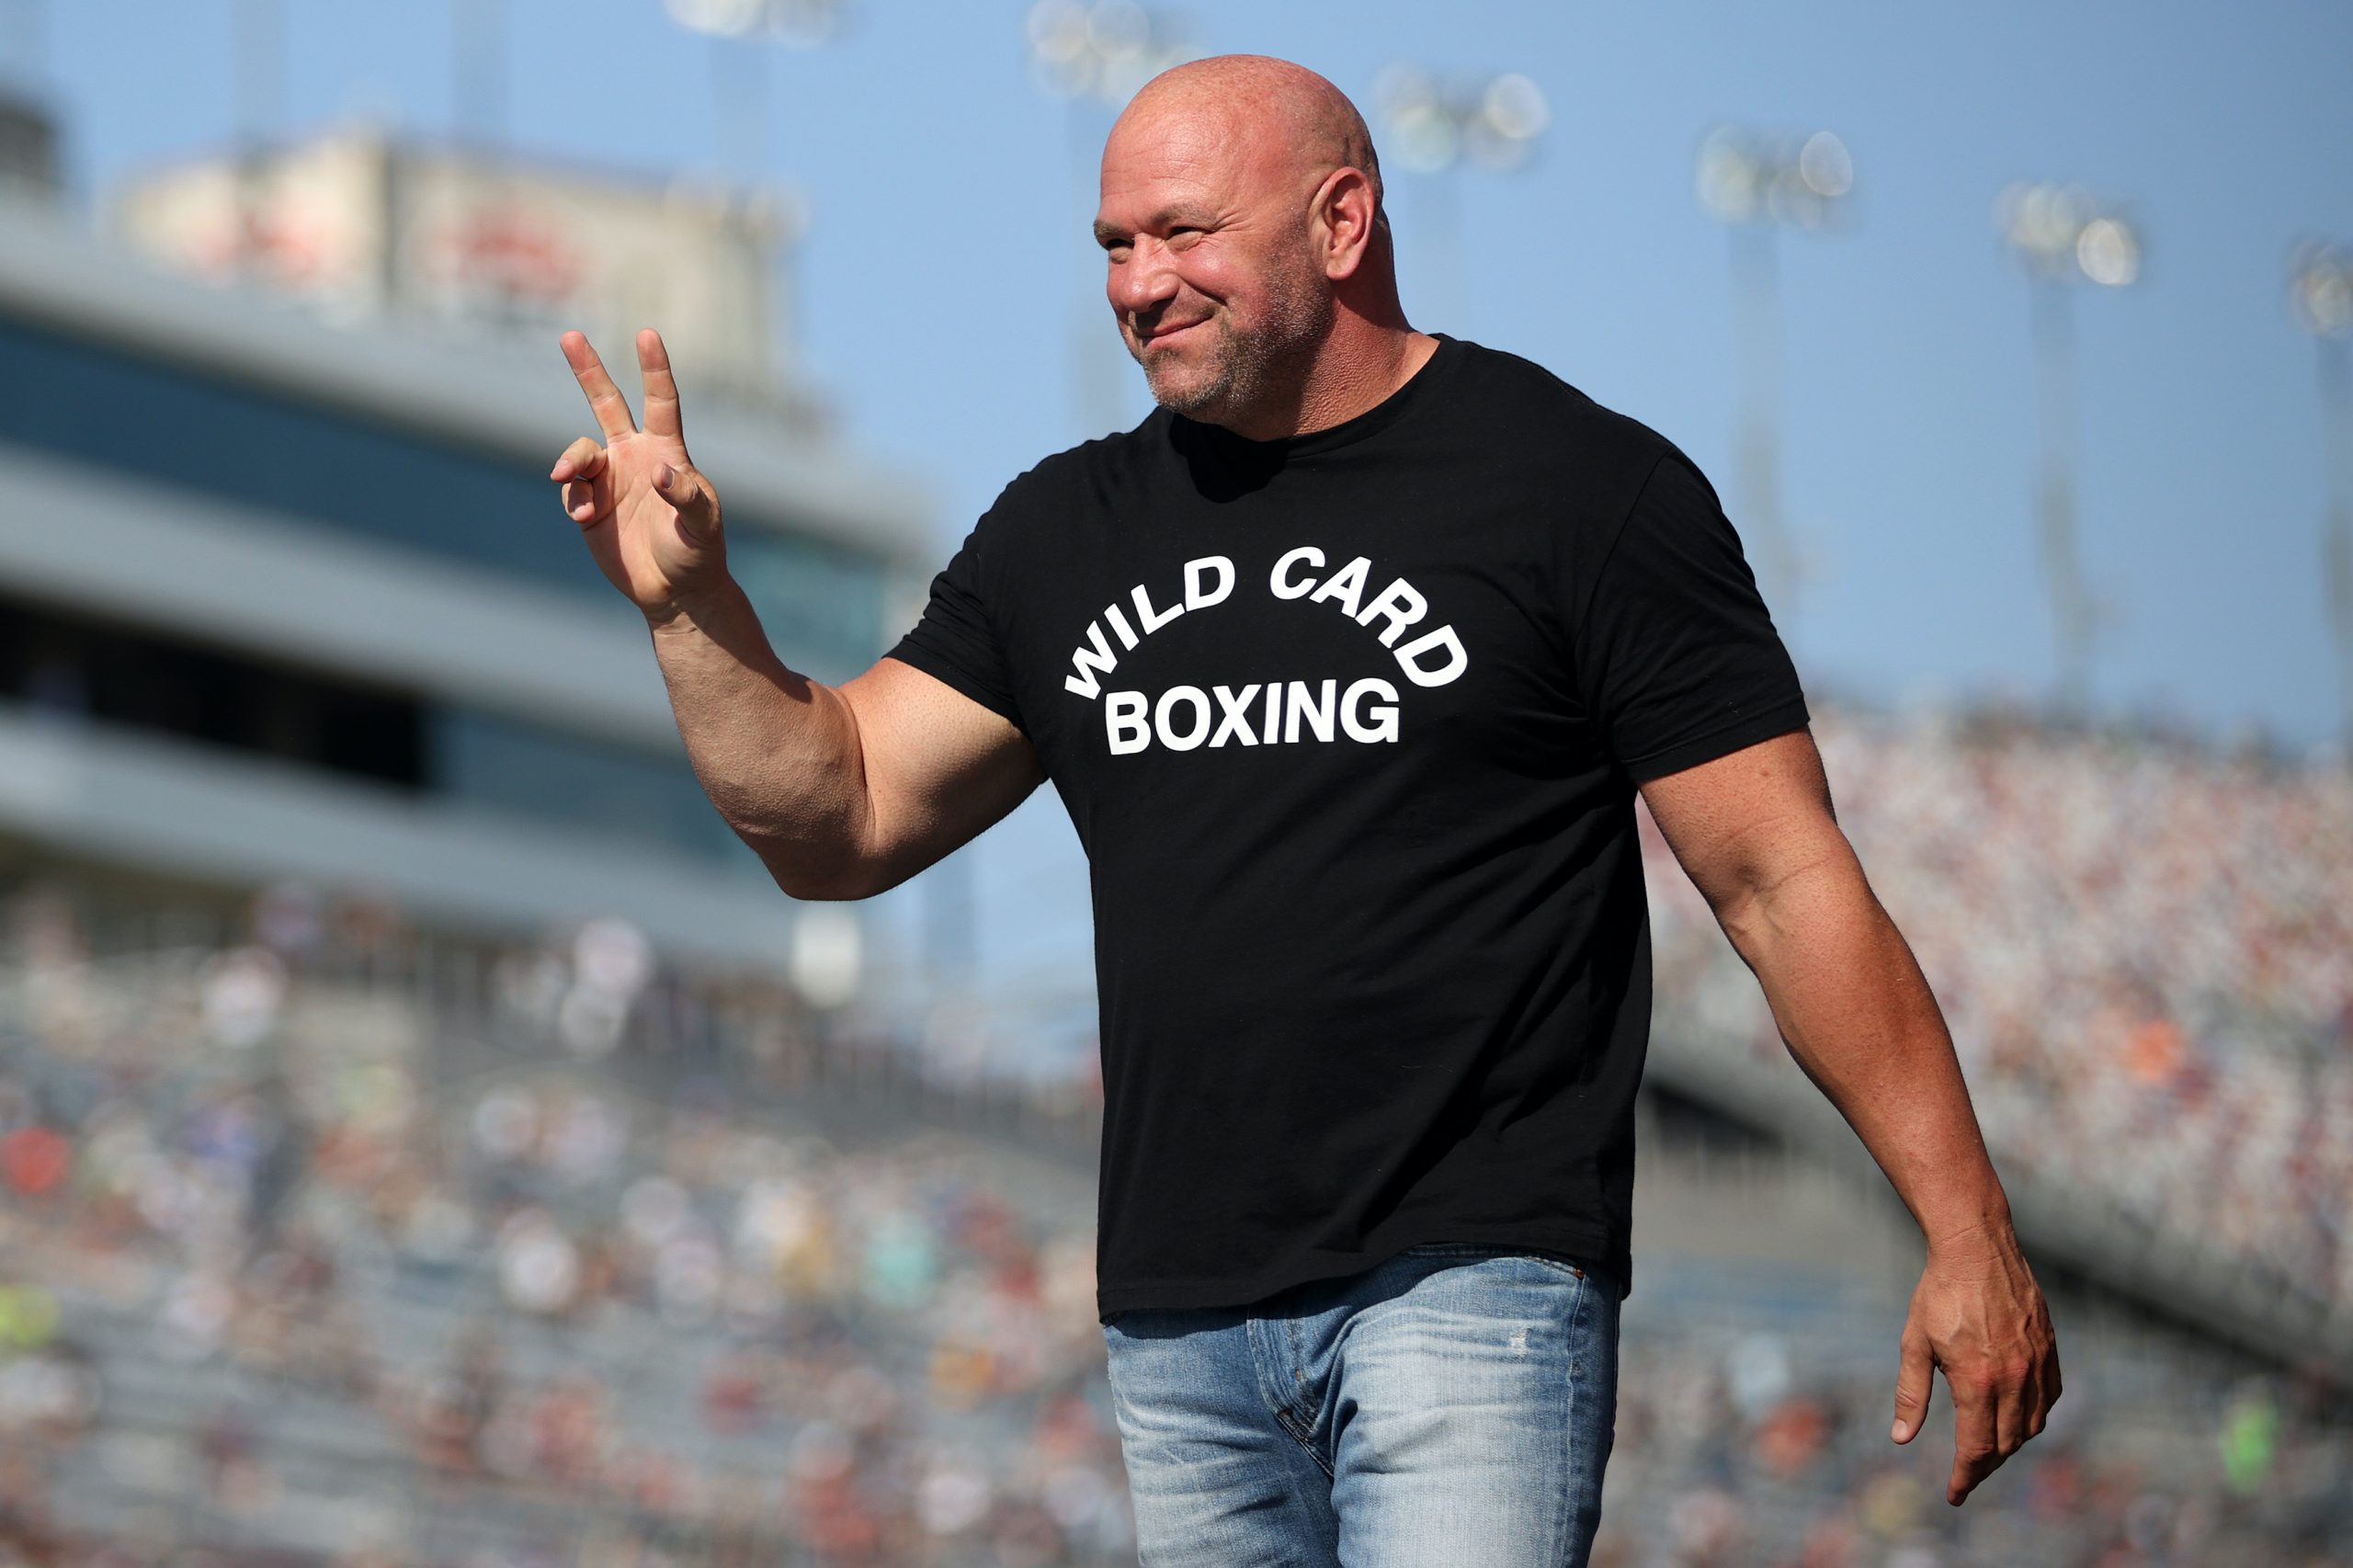 Mike Joy Reveals UFC President Dana White Is Now Invested in NASCAR During Practice Coverage of Clash at the Coliseum